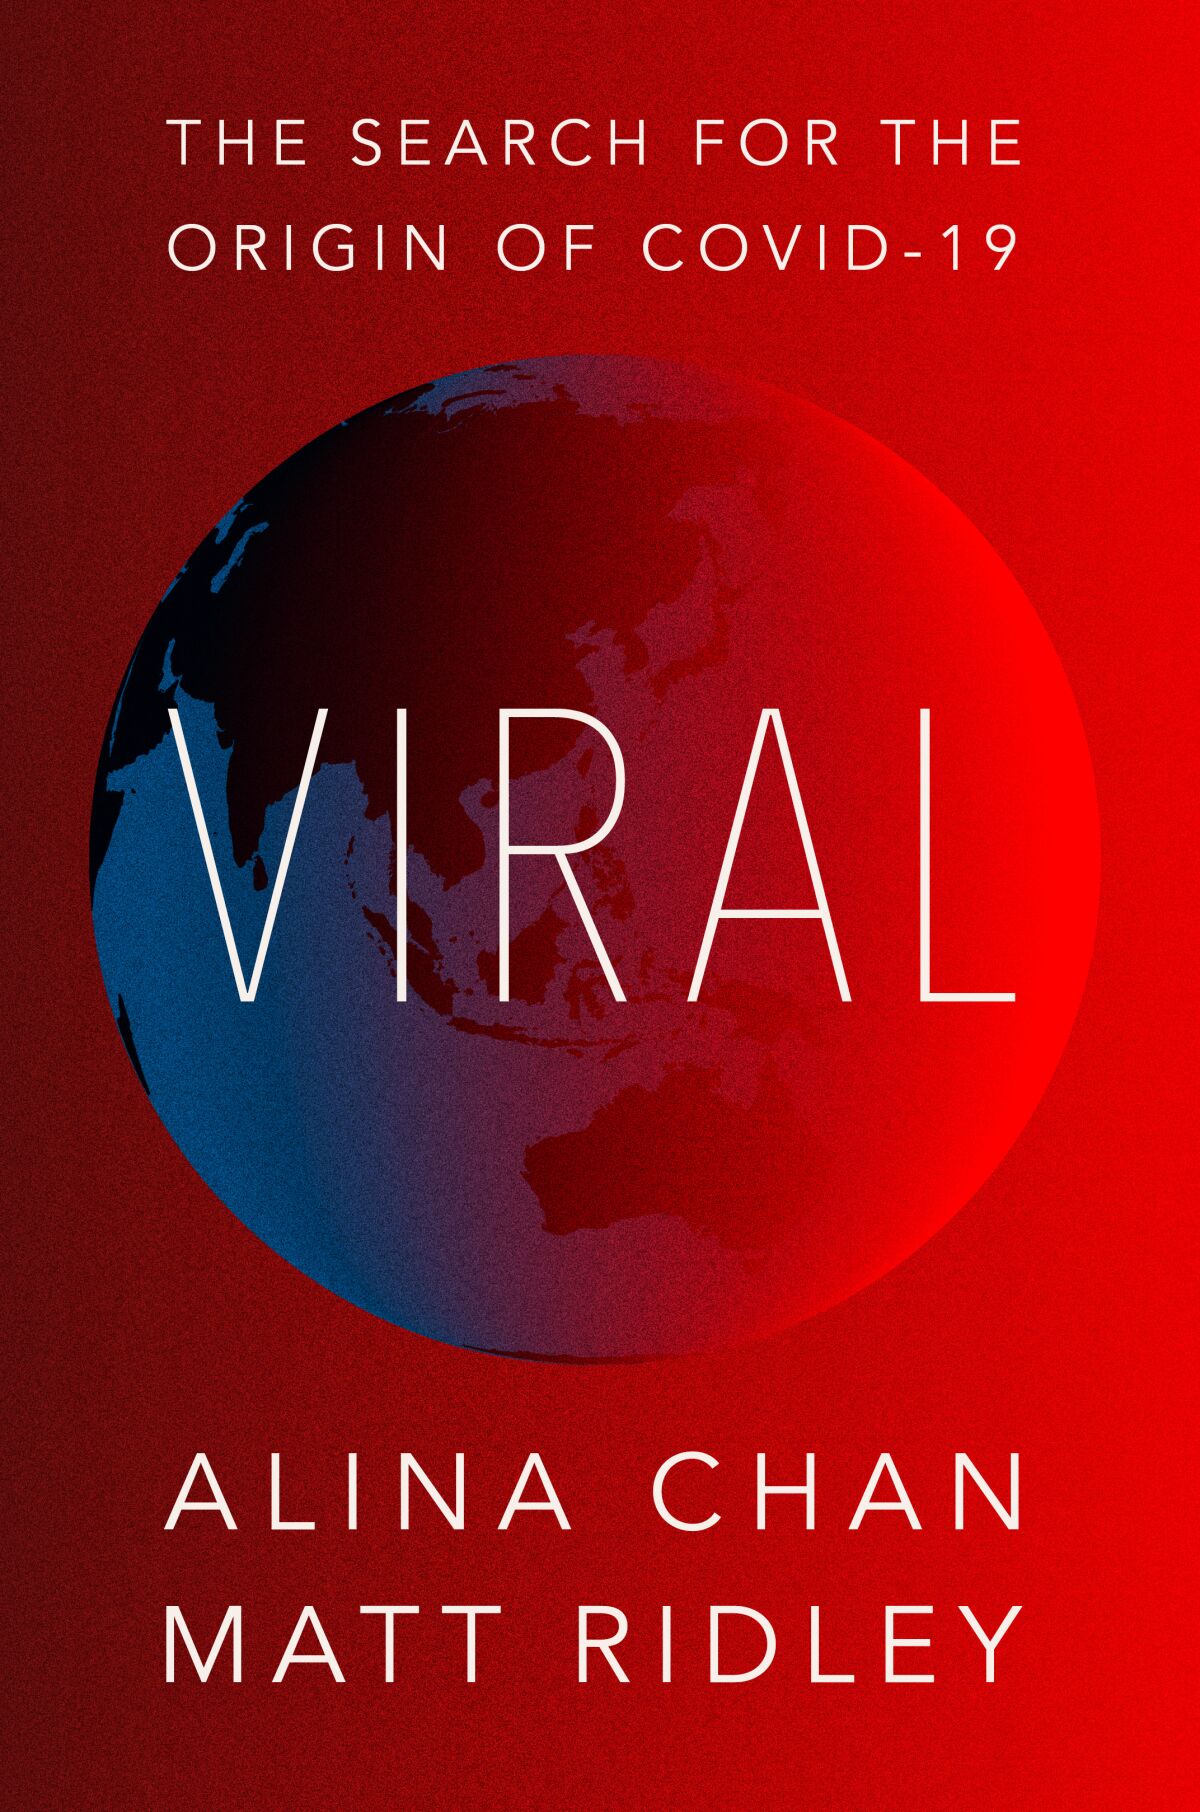 The red cover of "Viral: The Search for the Origin of COVID-19," by Alina Chan and Matt Ridley.